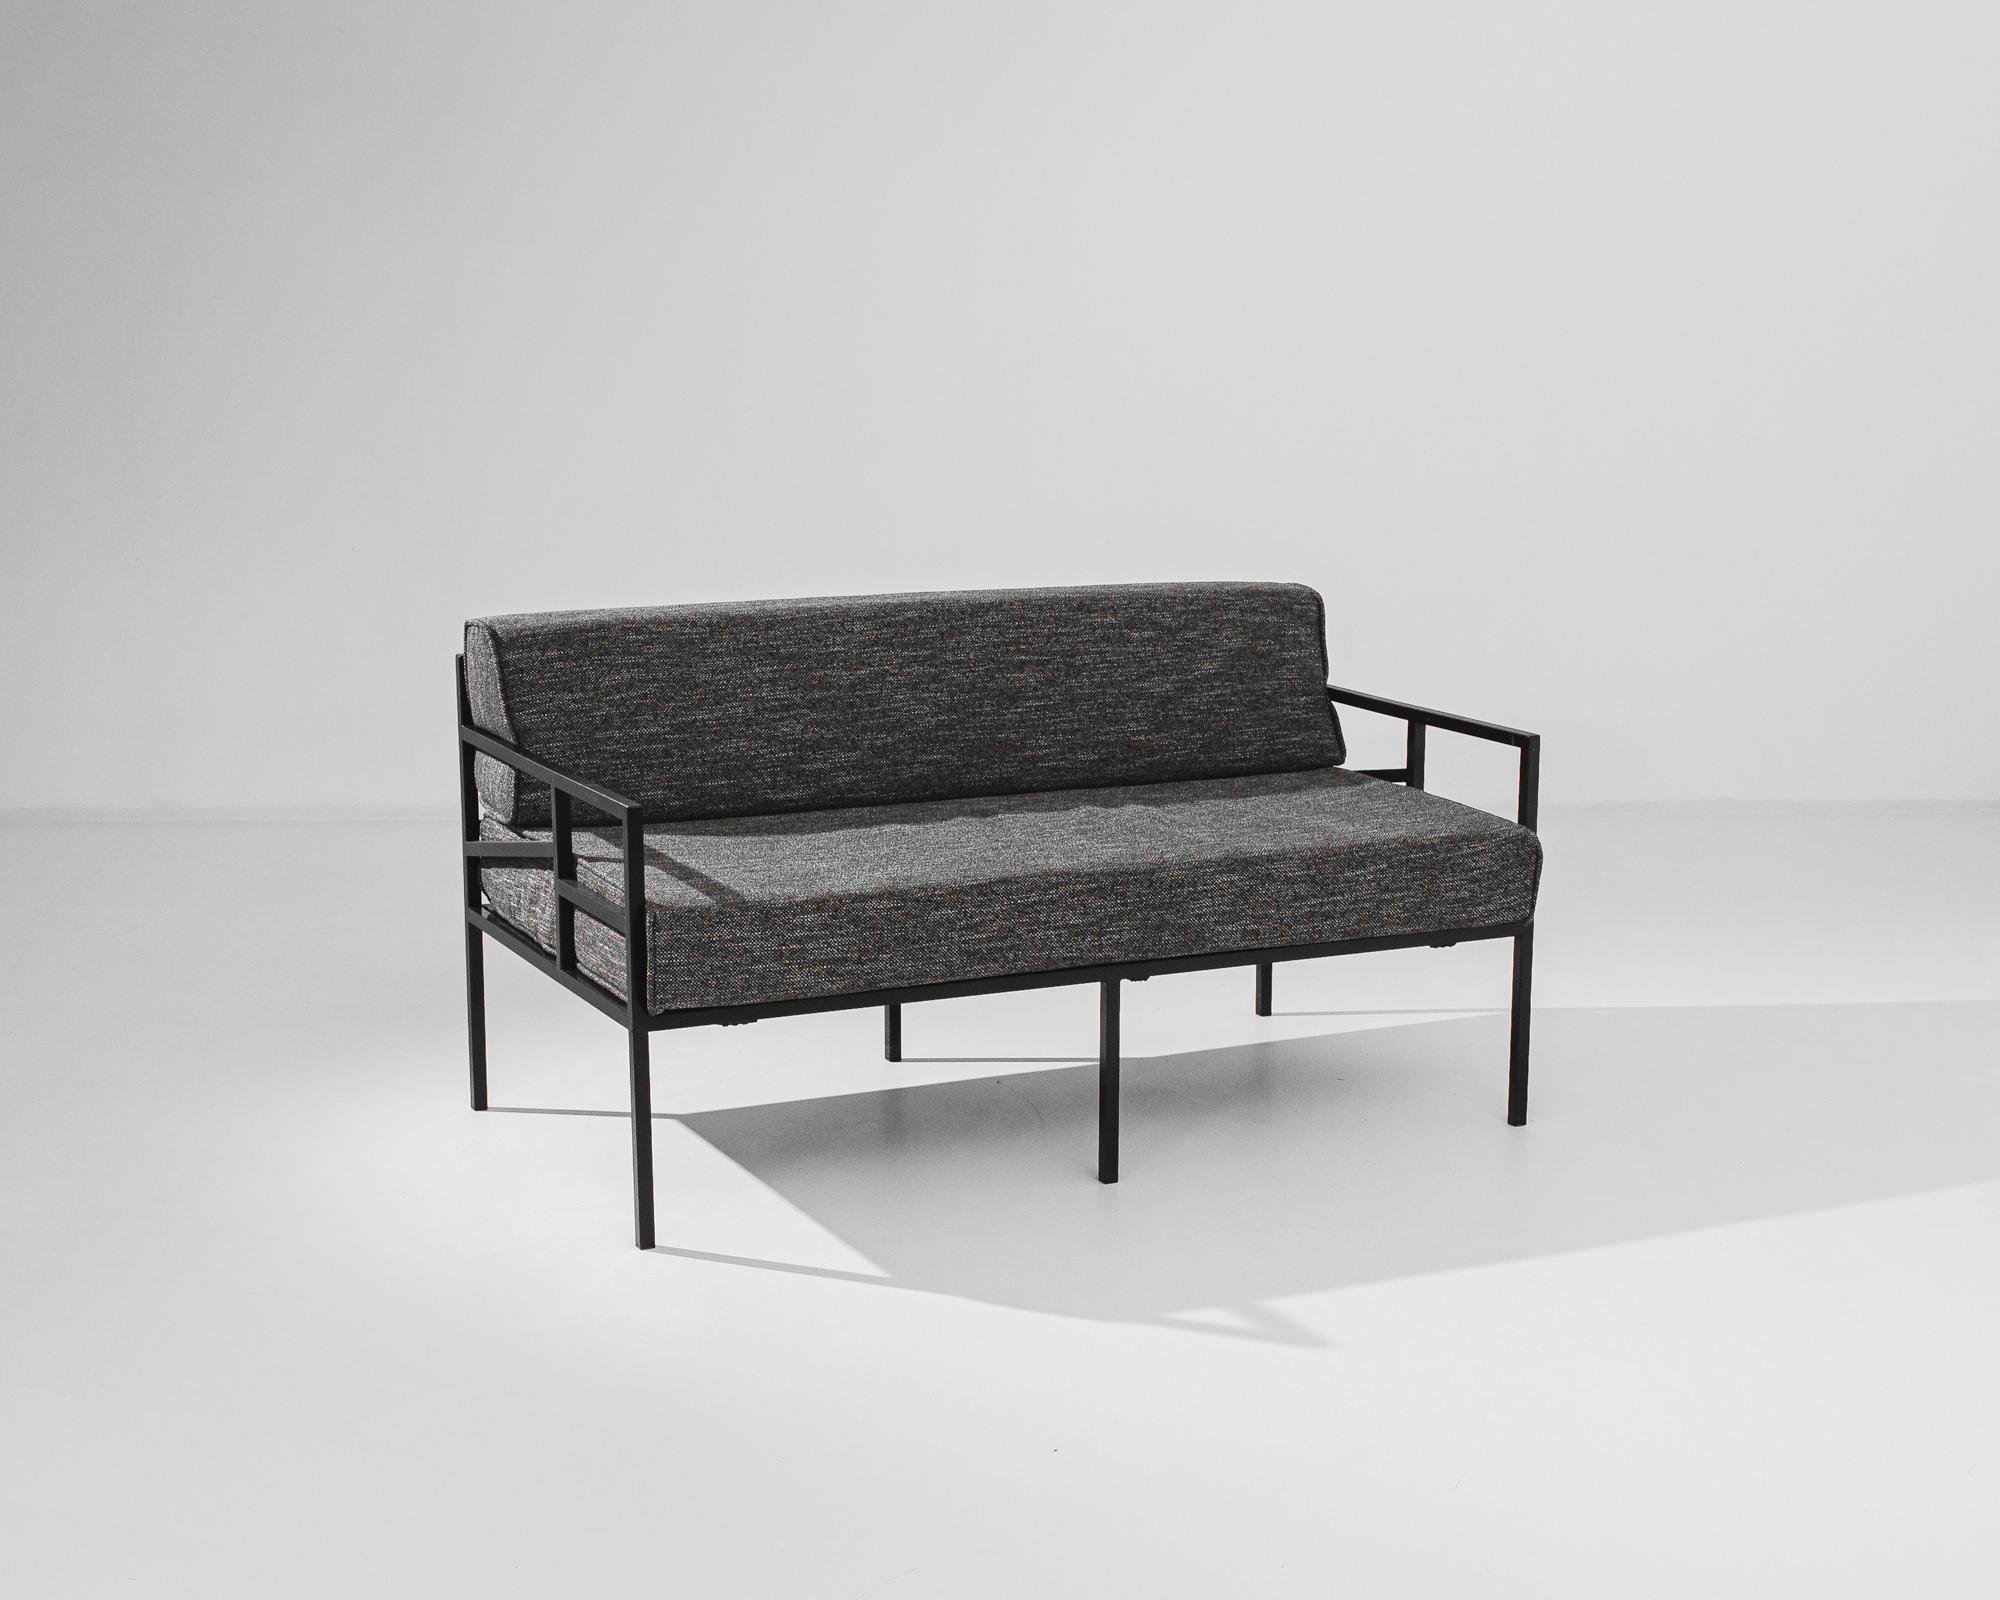 A metal sofa with upholstered seat and back produced in France circa 1960. A vintage sofa of thick, heather grey cushions set upon a deep, black metal frame with six, thin legs. The bold profile of the cushions grounds the otherwise light and airy